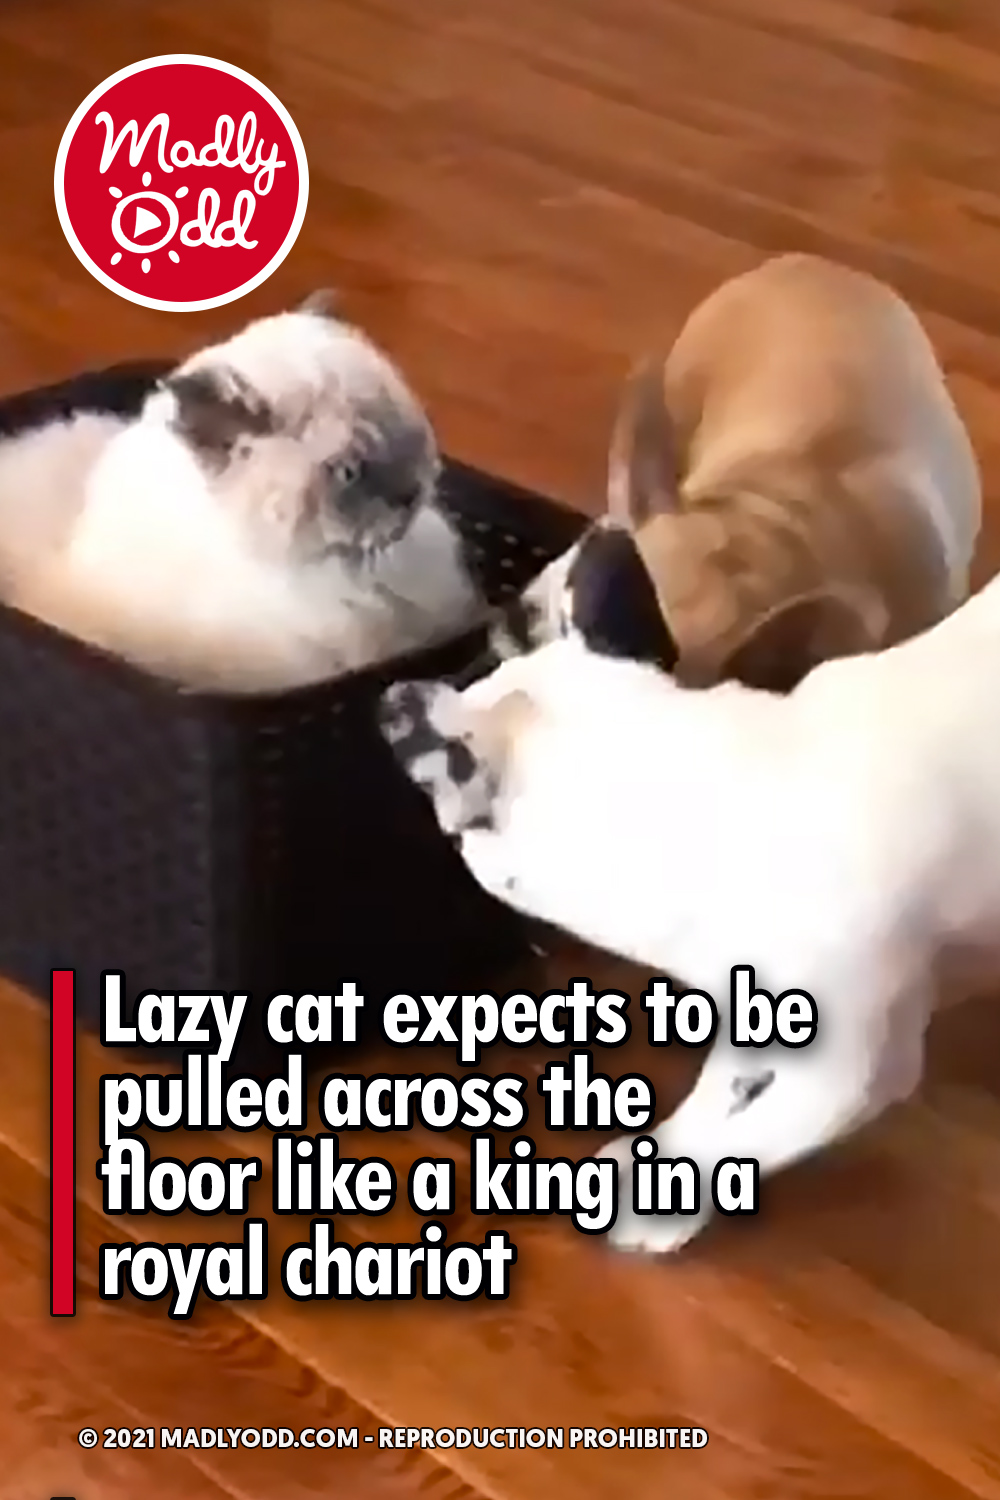 Lazy cat expects to be pulled across the floor like a king in a royal chariot